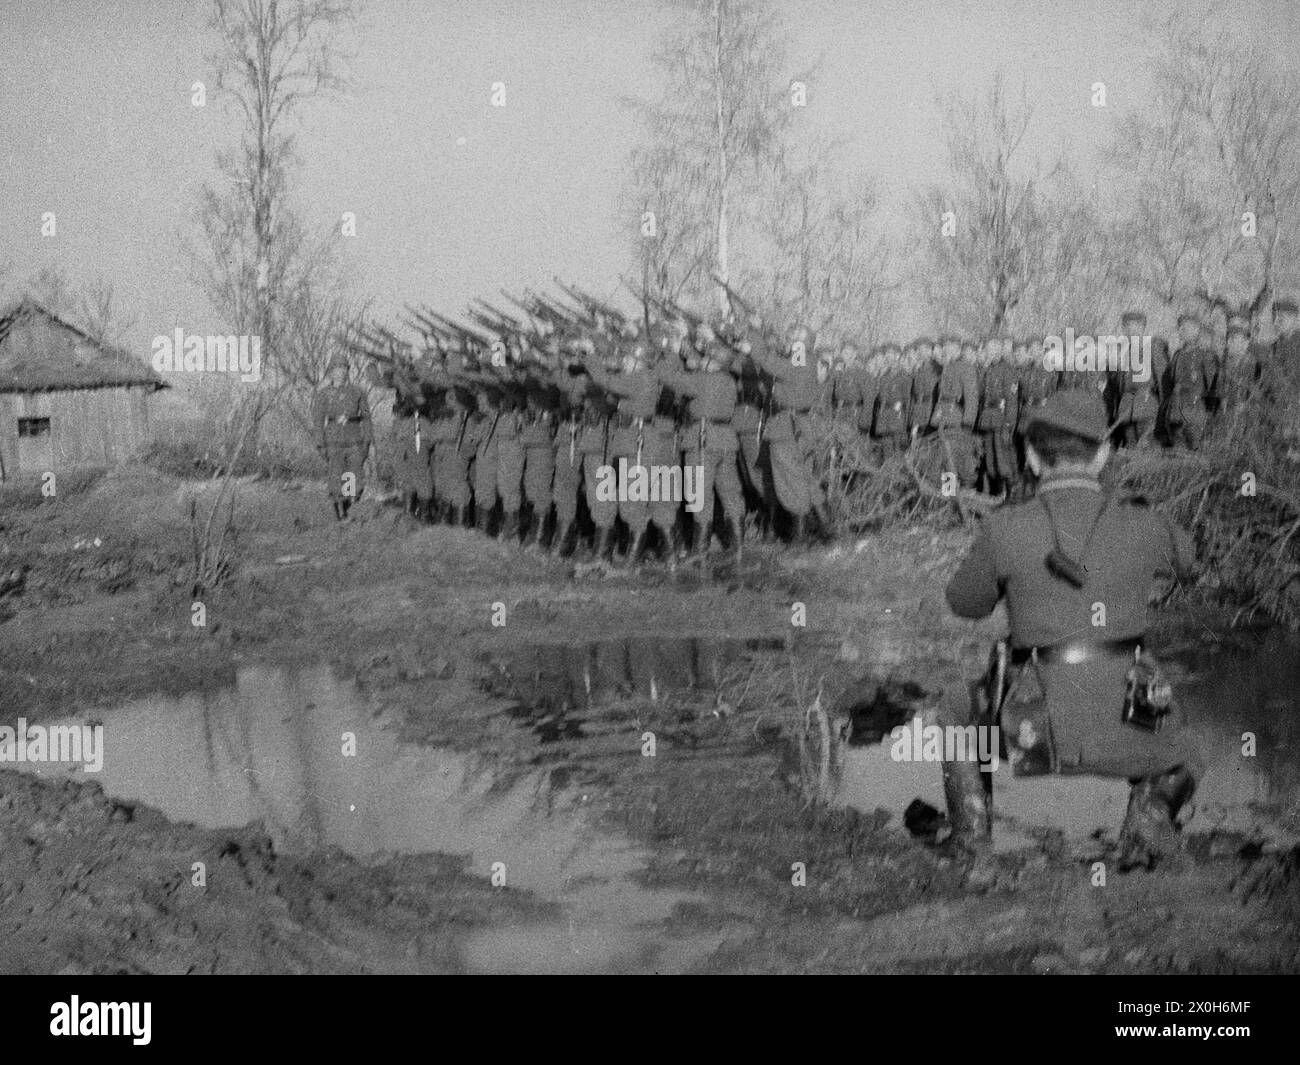 An honor formation fires a salute. Another soldier photographs the ceremony. The picture was taken by a member of the Radfahrgrenadierregiment 2 / Radfahrsicherungsregiment 2, in the northern section of the Eastern Front. [automated translation] Stock Photo